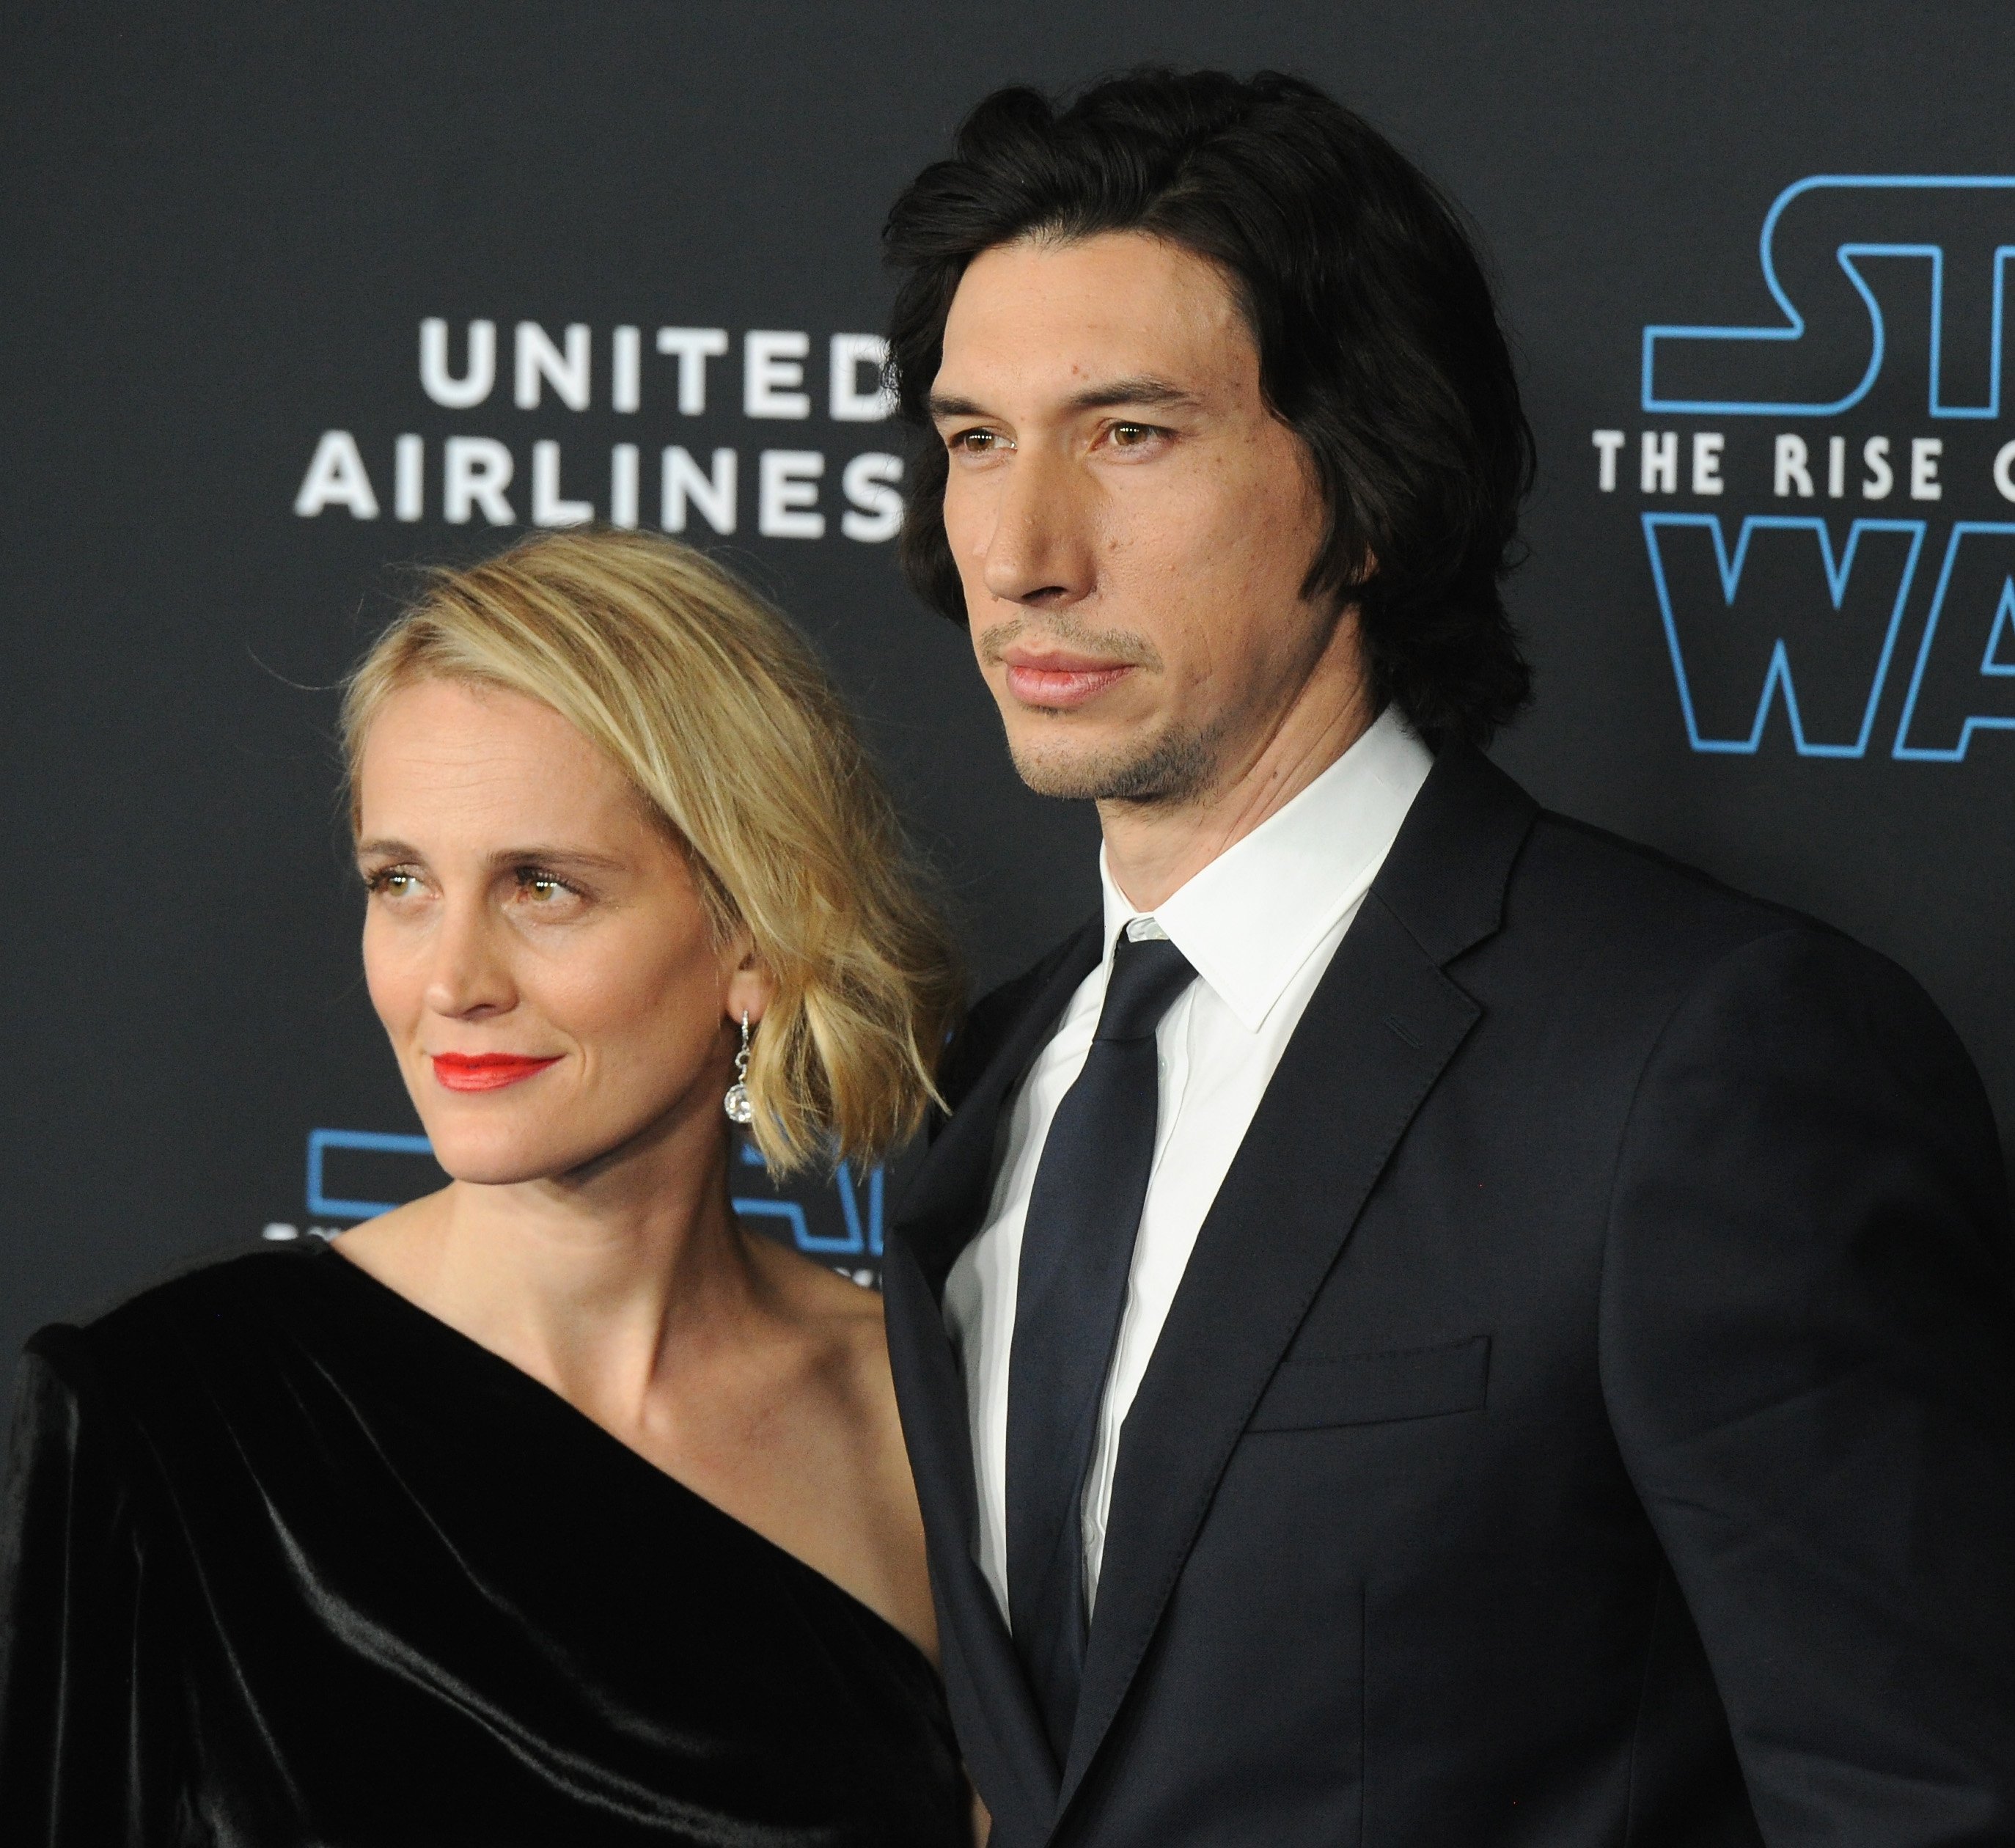  Joanne Tucker and Adam Driver at the Premiere Of Disney's "Star Wars: The Rise Of Skywalker" on December 16, 2019, in Hollywood. | Source: Getty Images